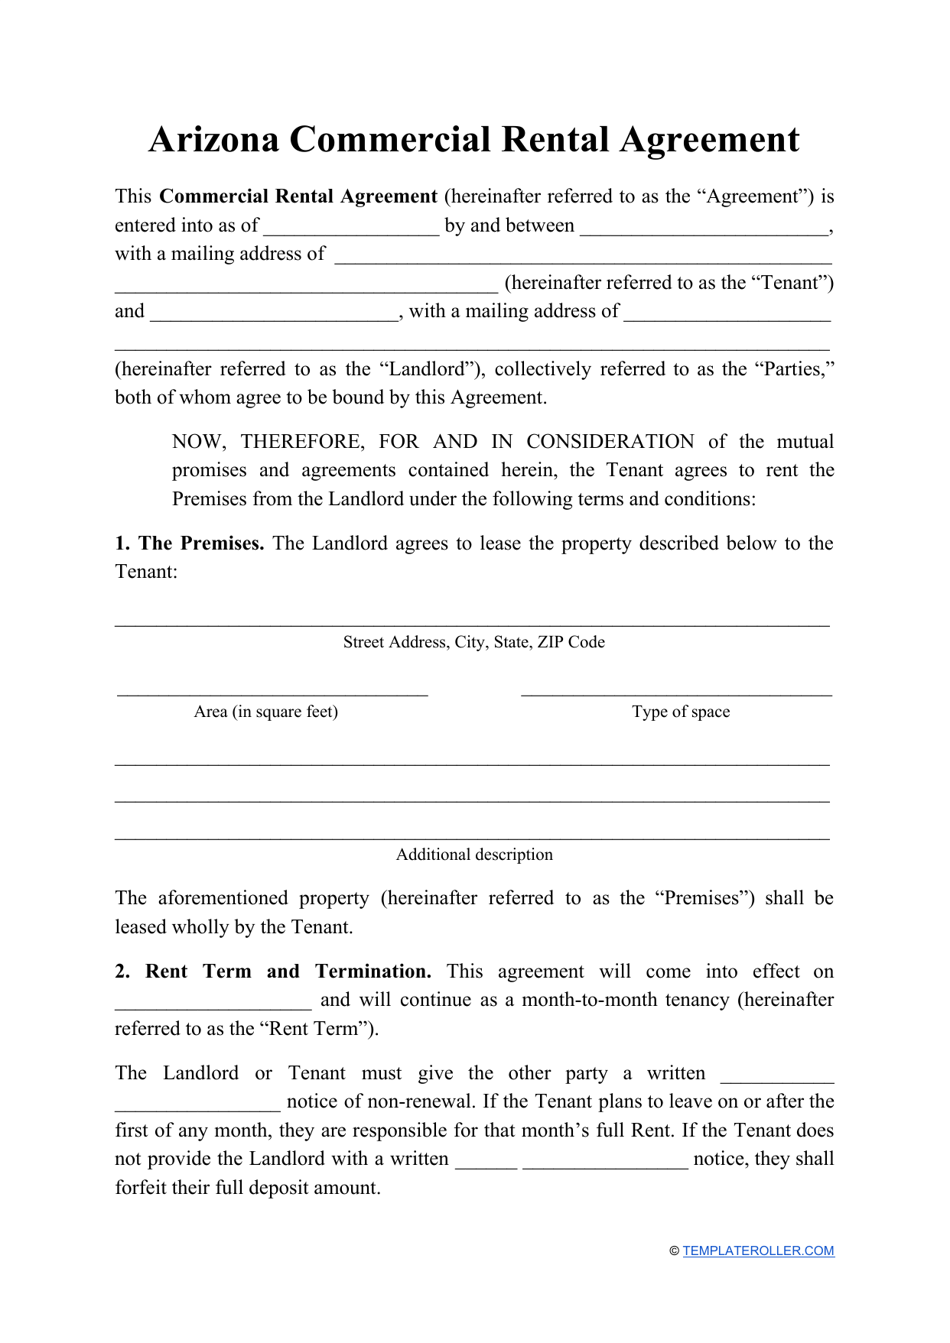 Commercial Rental Agreement Template - Arizona, Page 1